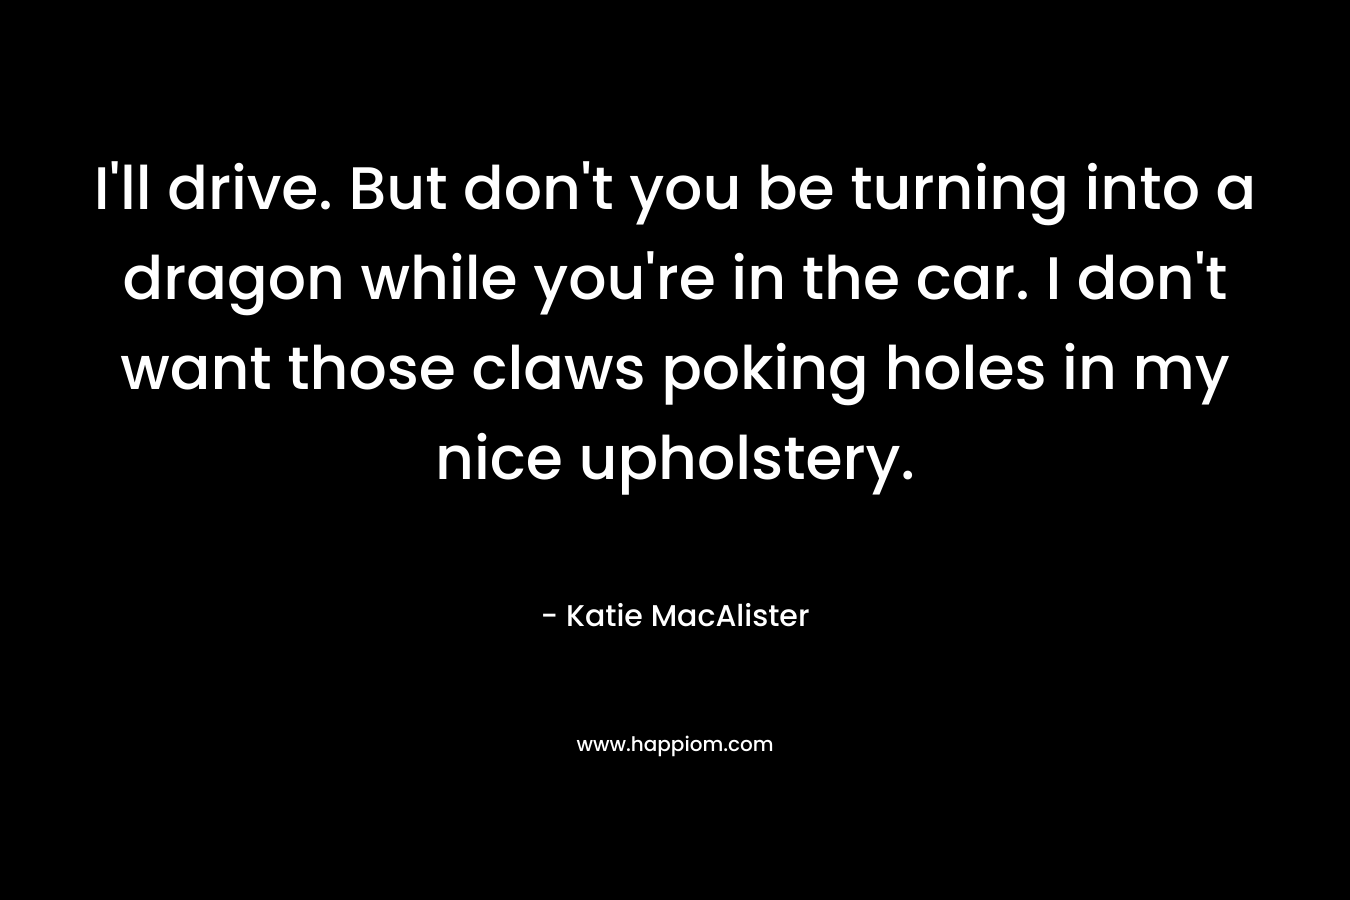 I’ll drive. But don’t you be turning into a dragon while you’re in the car. I don’t want those claws poking holes in my nice upholstery. – Katie MacAlister